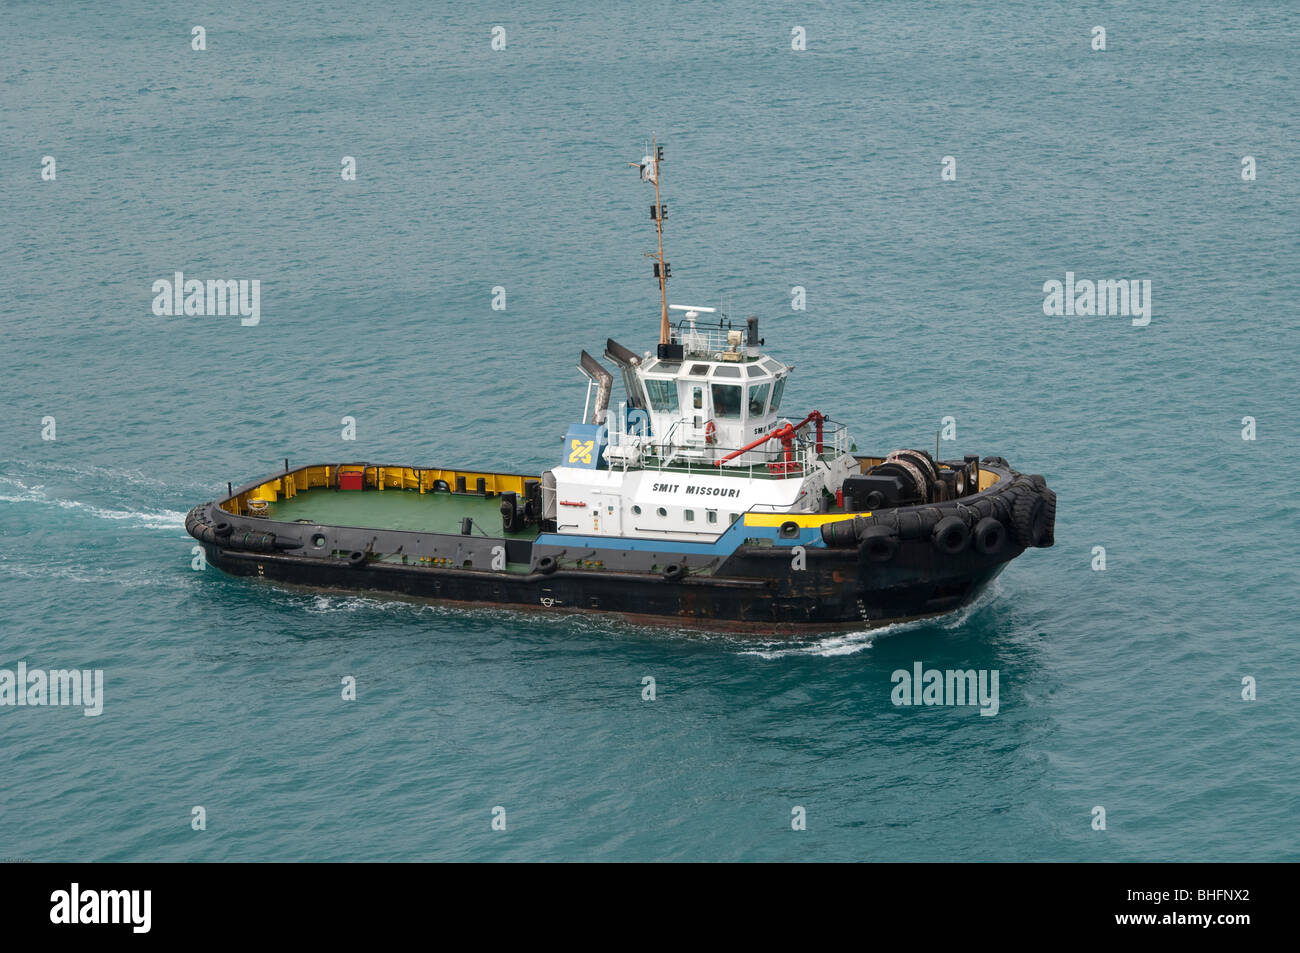 The 'Smit Missouri' tug boat motors across the harbour to provide assistance to another ocean going cargo ship. Stock Photo